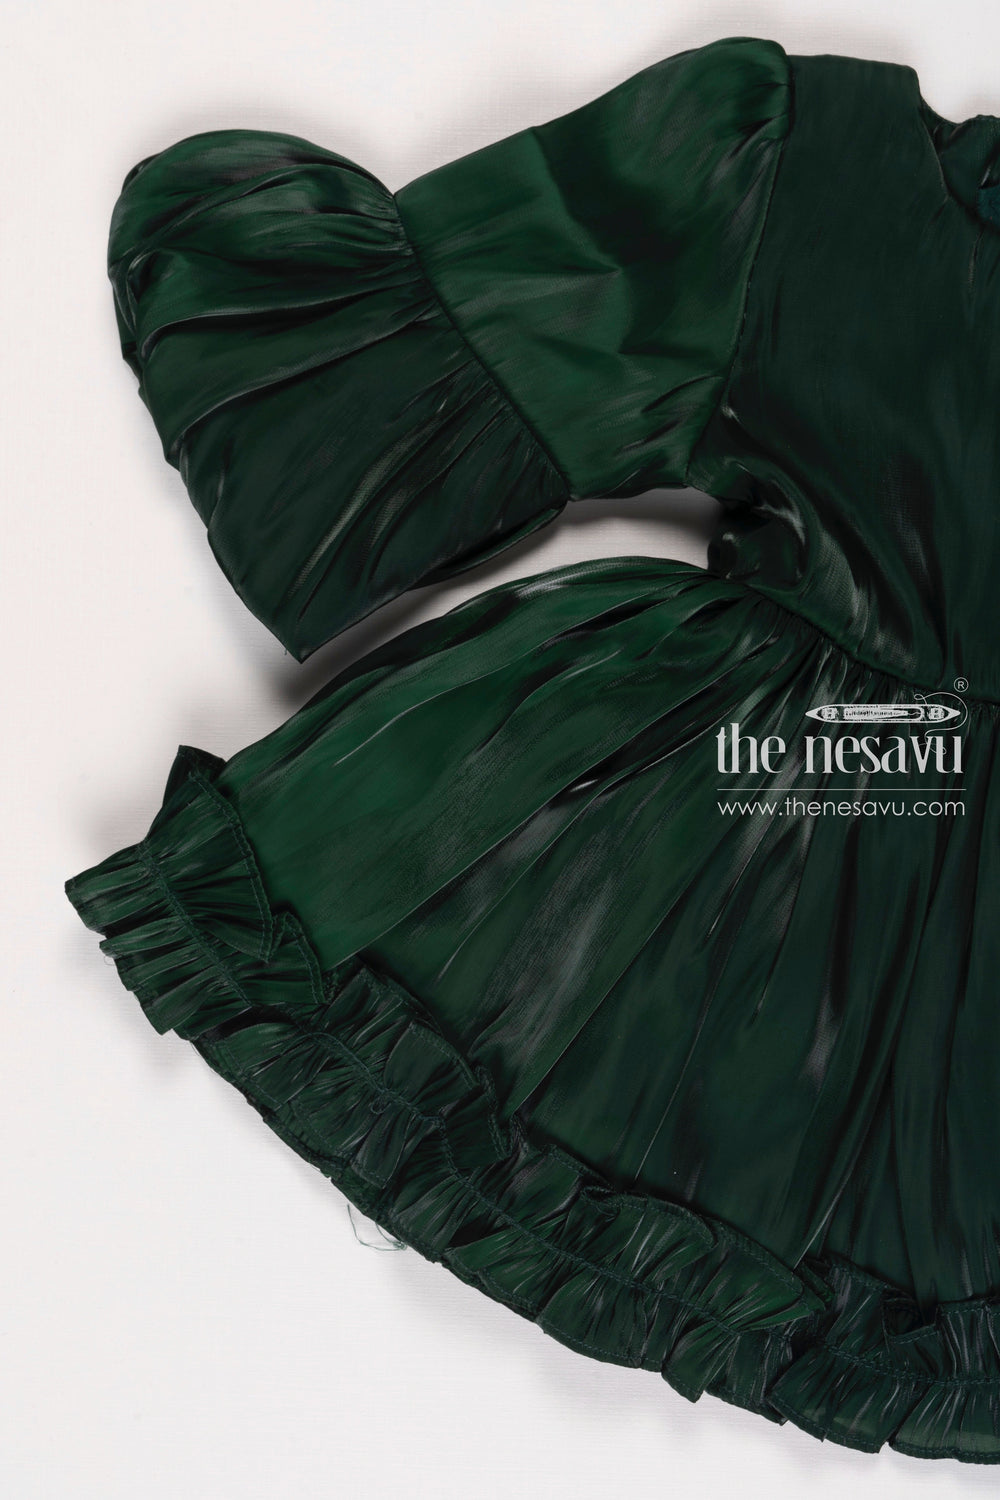 The Nesavu Baby Fancy Frock Luxe Emerald Infant Party Dress  Designer Newborn Frock with Ruffle Detail Nesavu Newborn Designer Dresses | Infant Party Dresses | Exclusive Baby Clothes Online | The Nesavu